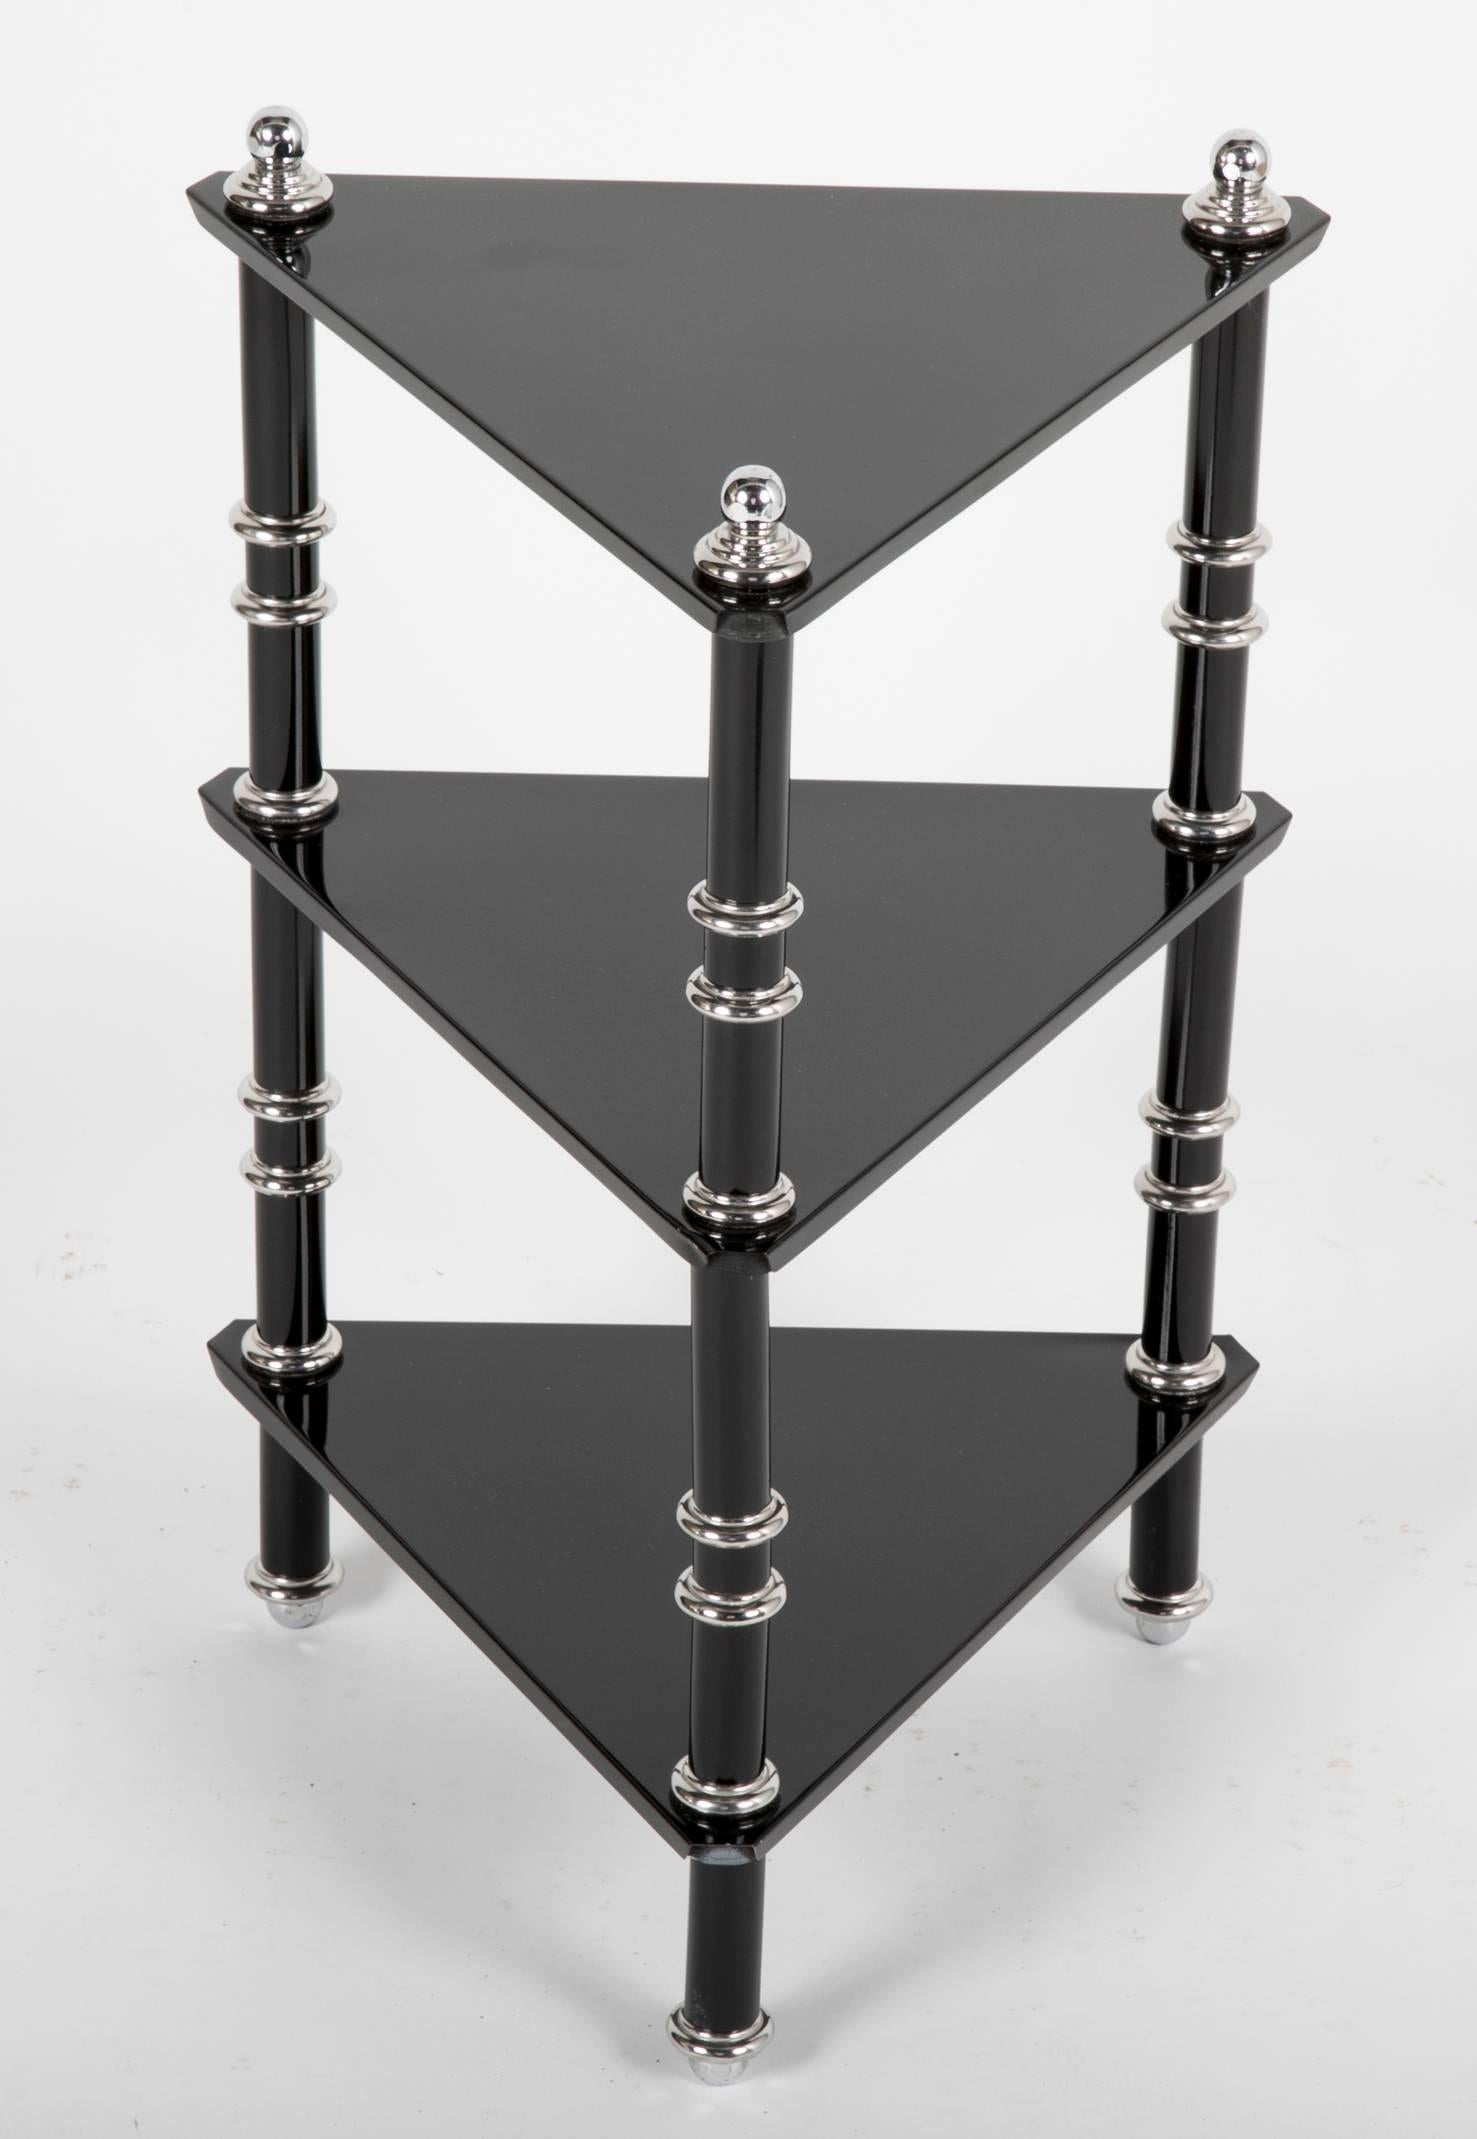 A ebonized and polished Aluminum side table by Warren McArthur. This side table is almost certainly from 1929, showing the prevalence of the triangle in McArthurs work around the time that he did the interior furniture for the Arizona Biltmore.